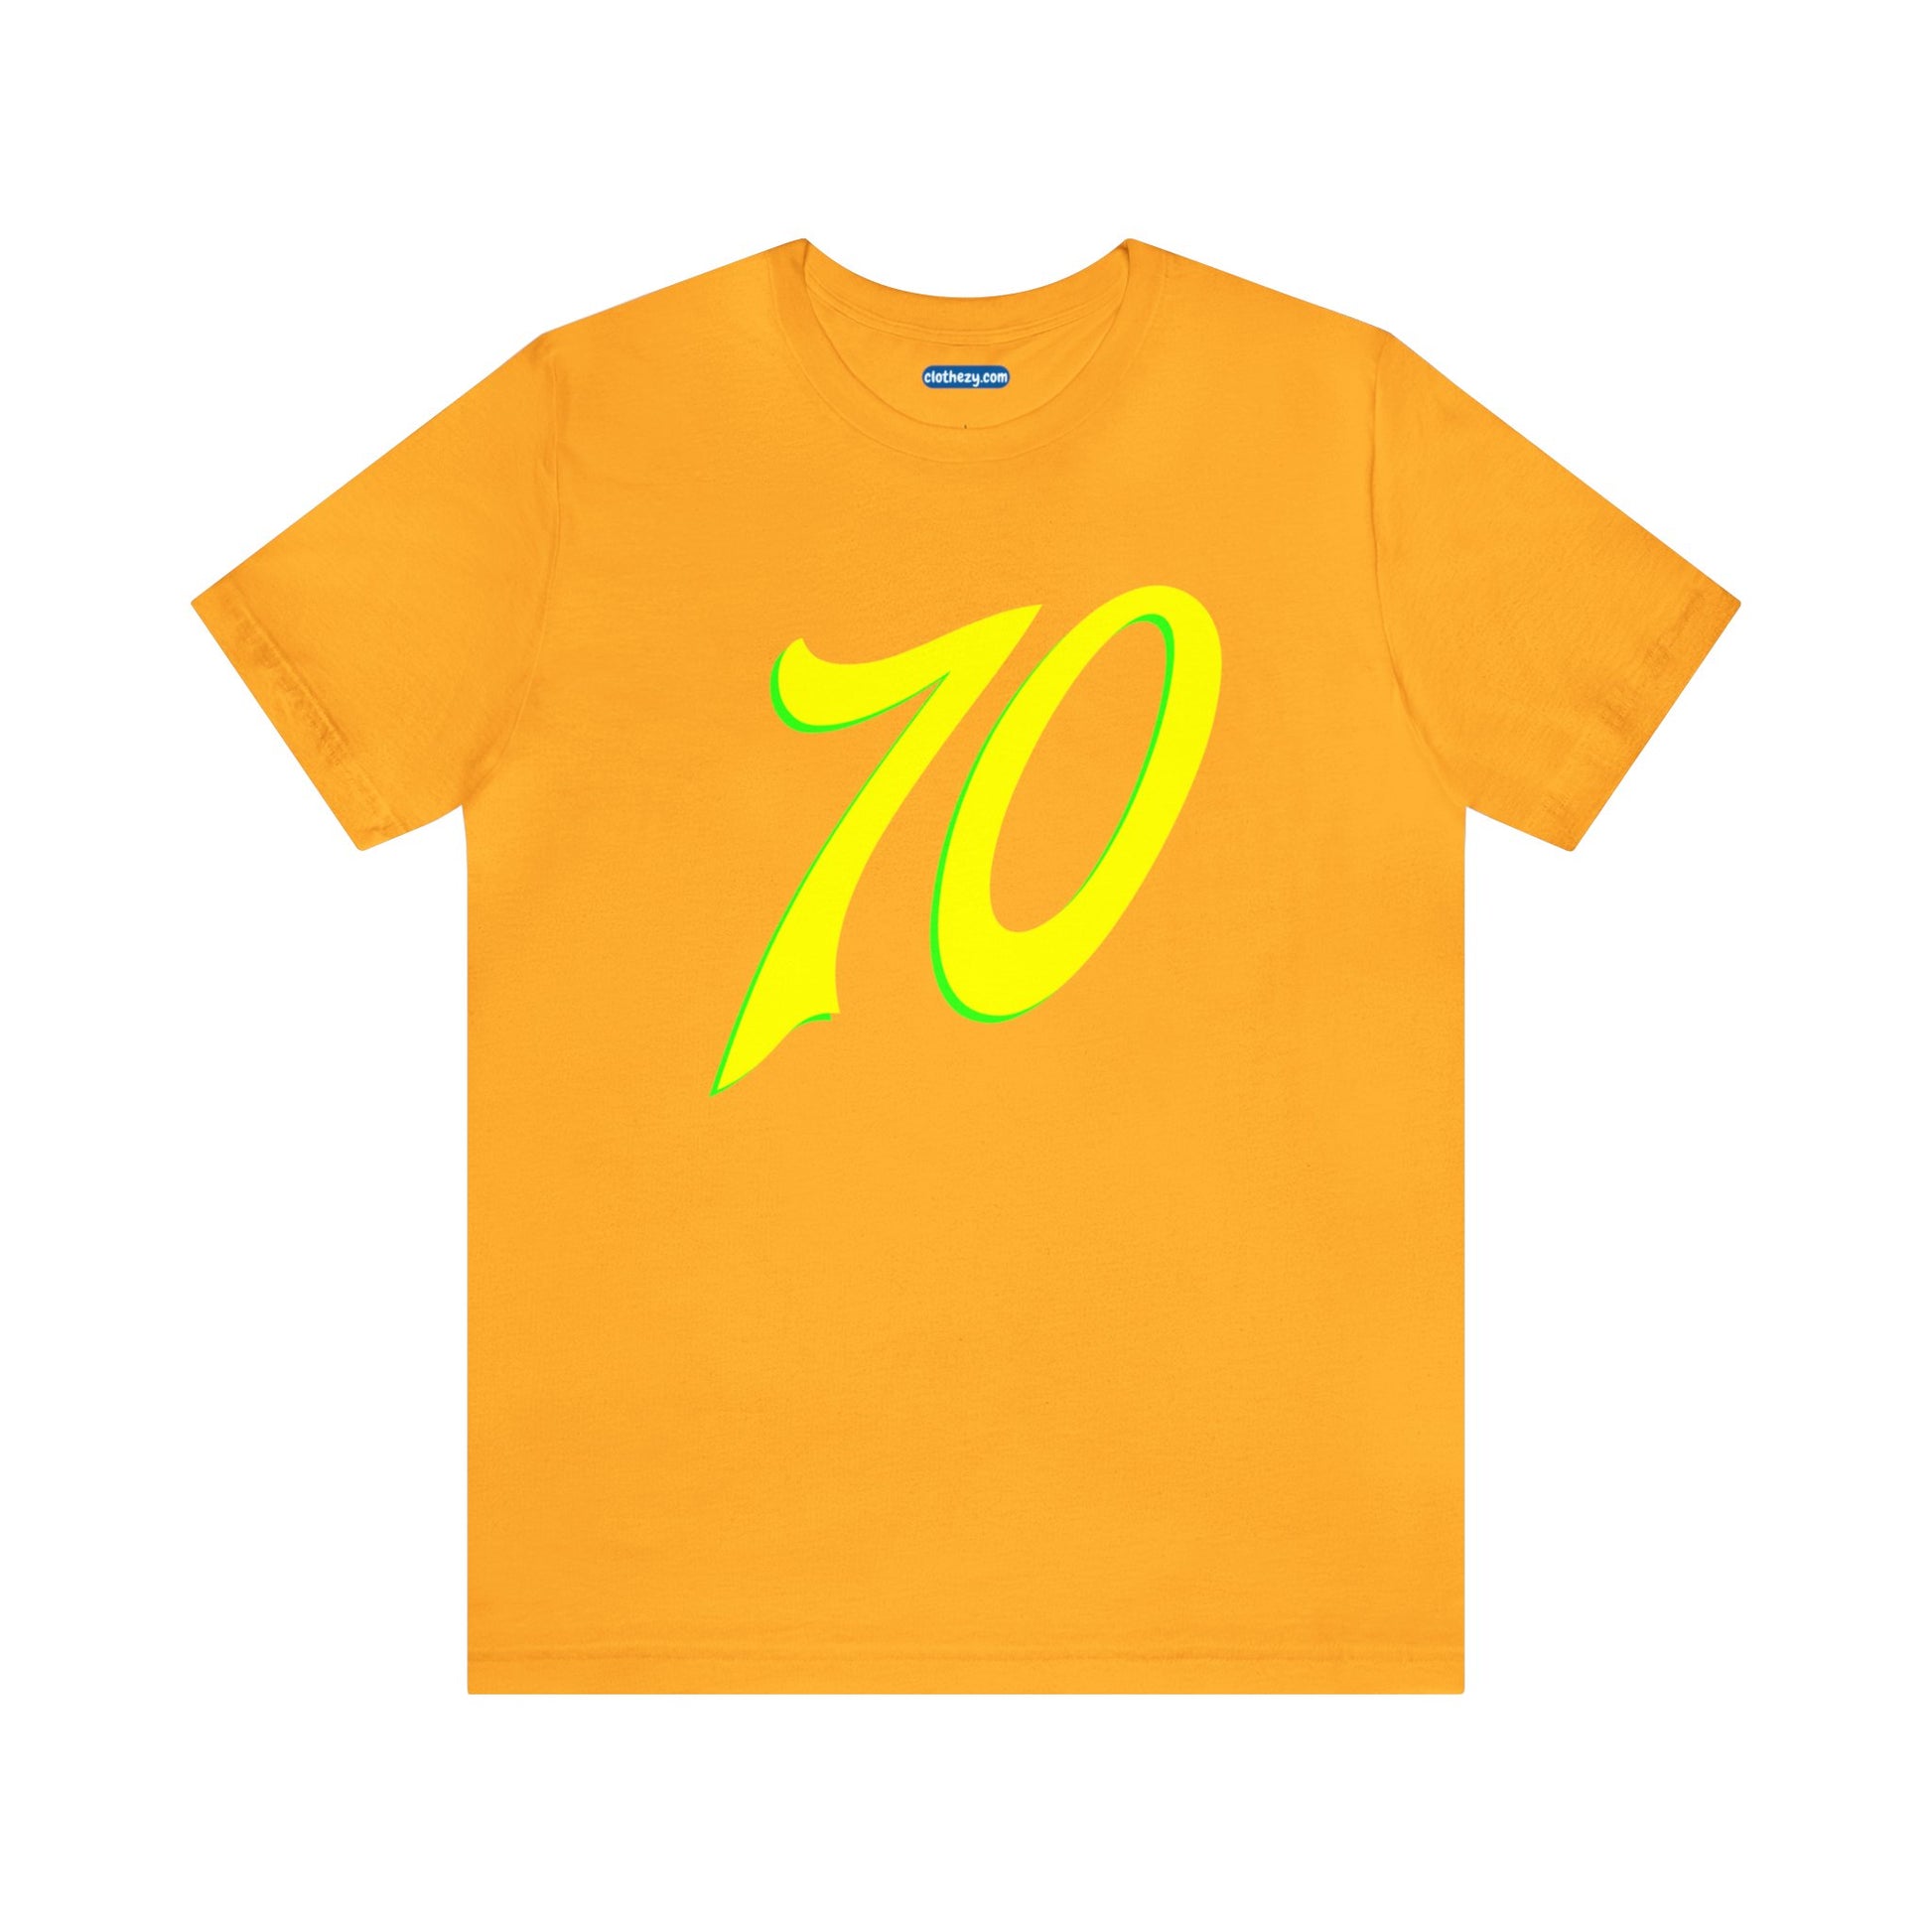 Number 70 Design - Soft Cotton Tee for birthdays and celebrations, Gift for friends and family, Multiple Options by clothezy.com in Green Heather Size Small - Buy Now